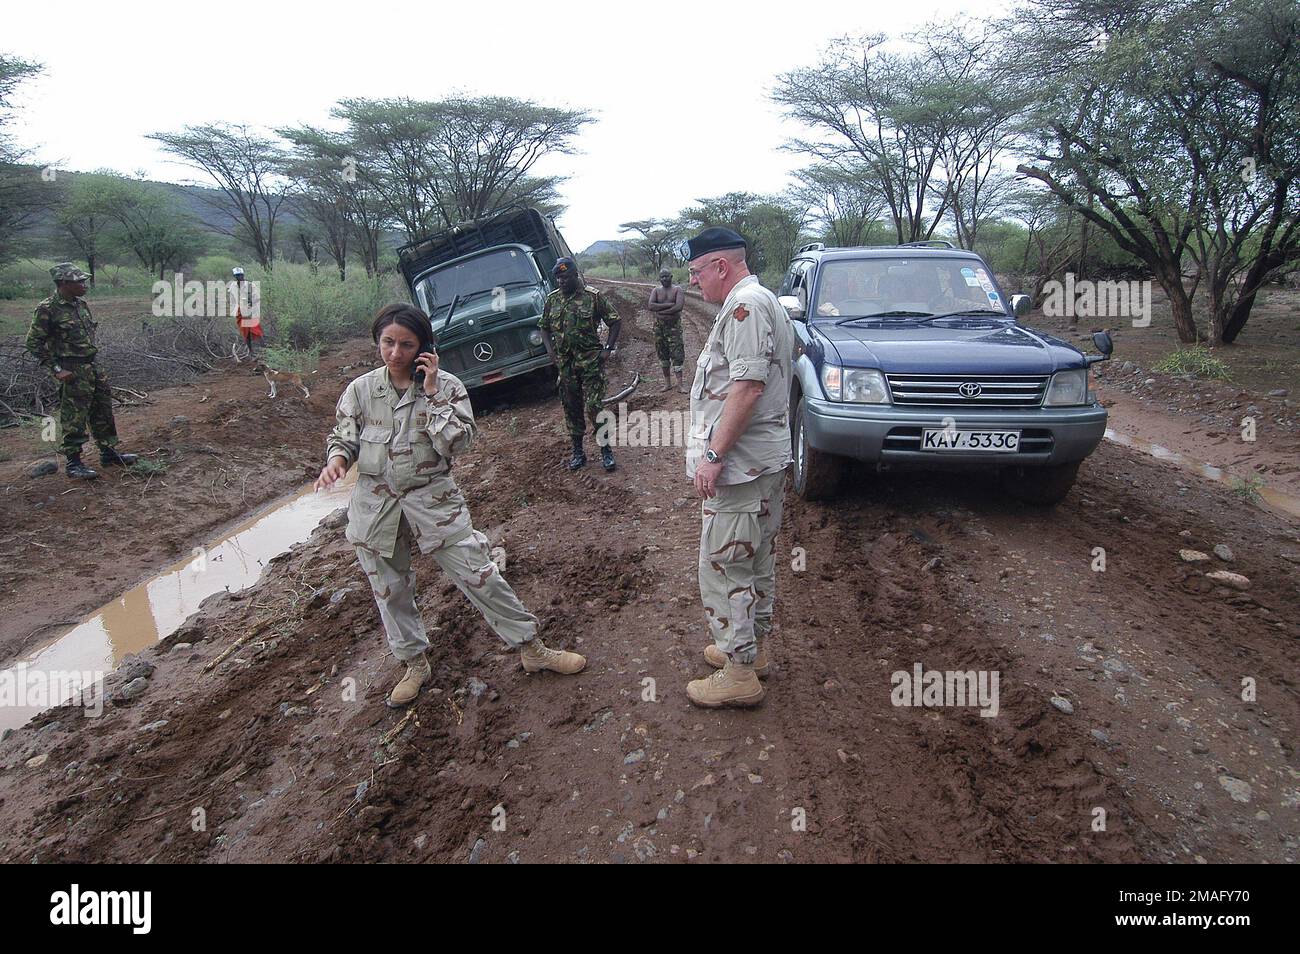 060804-N-0411D-003. [Complete] Scene Caption: U.S. Navy Operations SPECIALIST 2nd Class (SW/AW) Jessica Silva, left, uses an Iridium phone to call for assistance to help members of the Kenyan Army forces free a vehicle which got stuck in the mud during Exercise Natural Fire at Nginyang, Kenya, on Aug. 4, 2006. Rain made portions of a one-lane road along the Nginyang River difficult to traverse. The 10-day multi-lateral field training exercise involves military personnel from East African Community nations, U.S.-based units and Combined Joint Task Force-Horn of Africa. The exercise will focus o Stock Photo